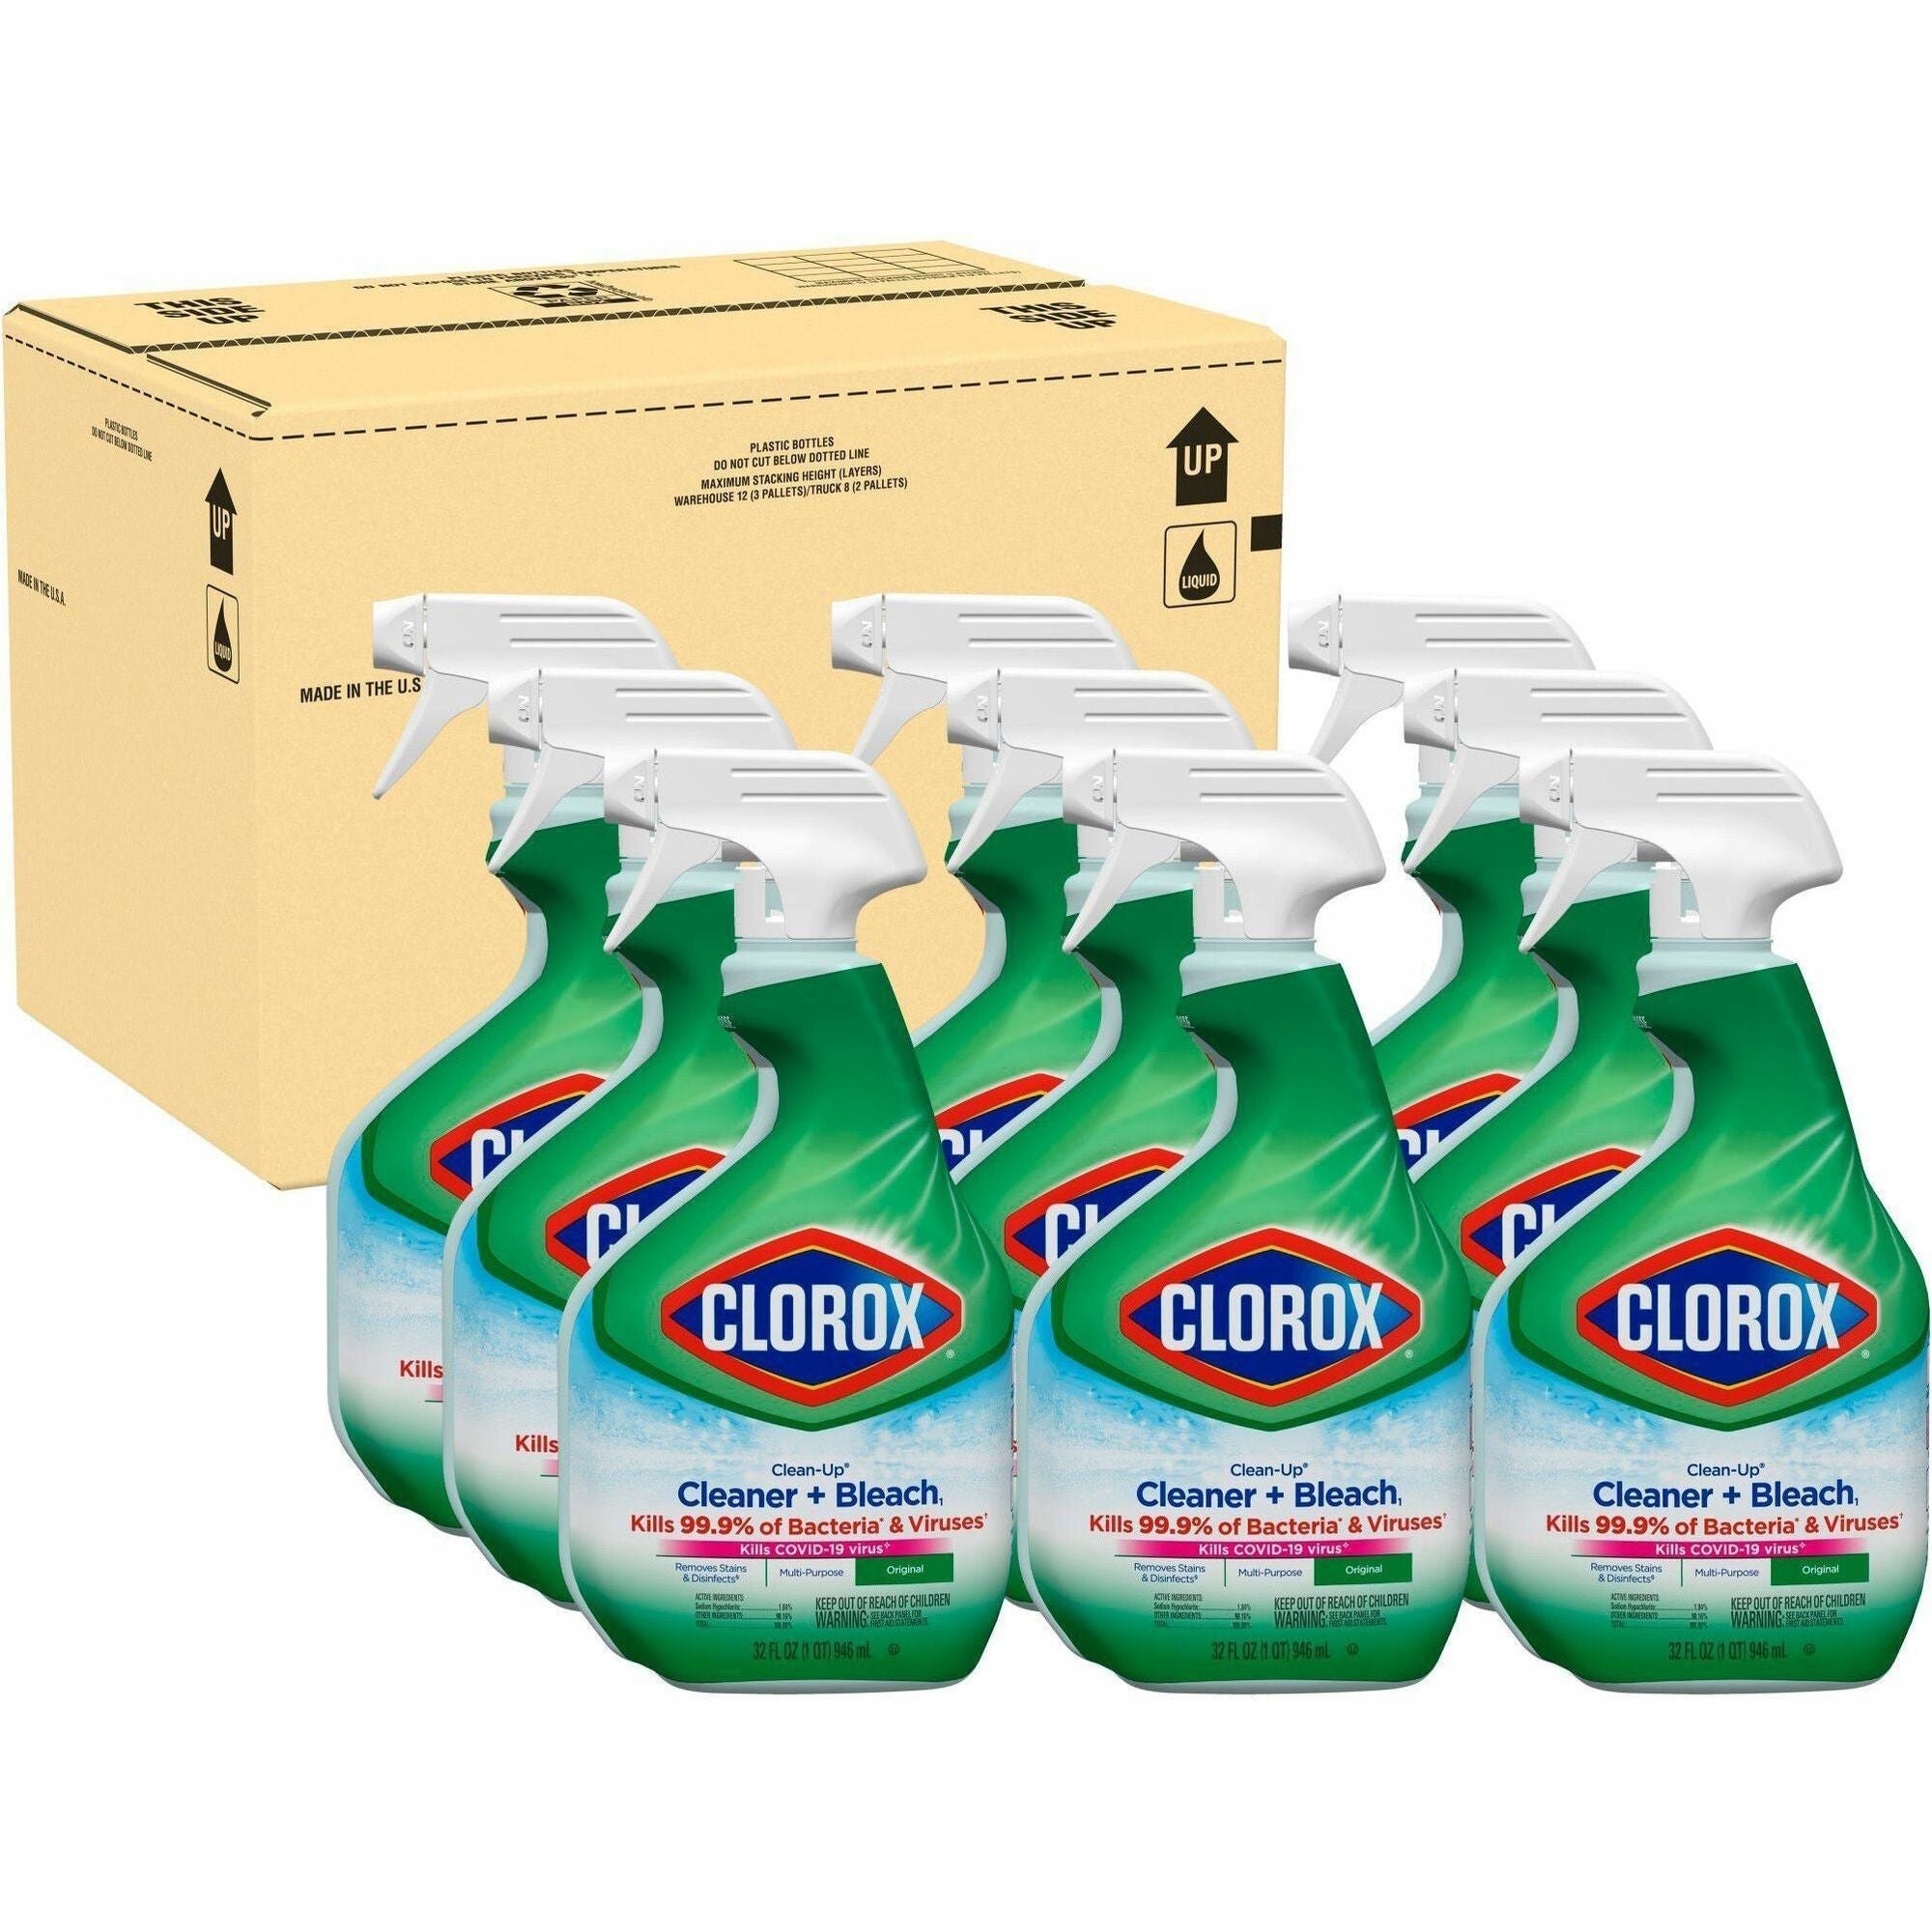 Clorox Clean-Up All Purpose Cleaner with Bleach - For Multi Surface - 32 fl oz (1 quart) - Original Scent - 9 / Carton - Deodorize, Disinfectant, Easy to Use - Multi - 1